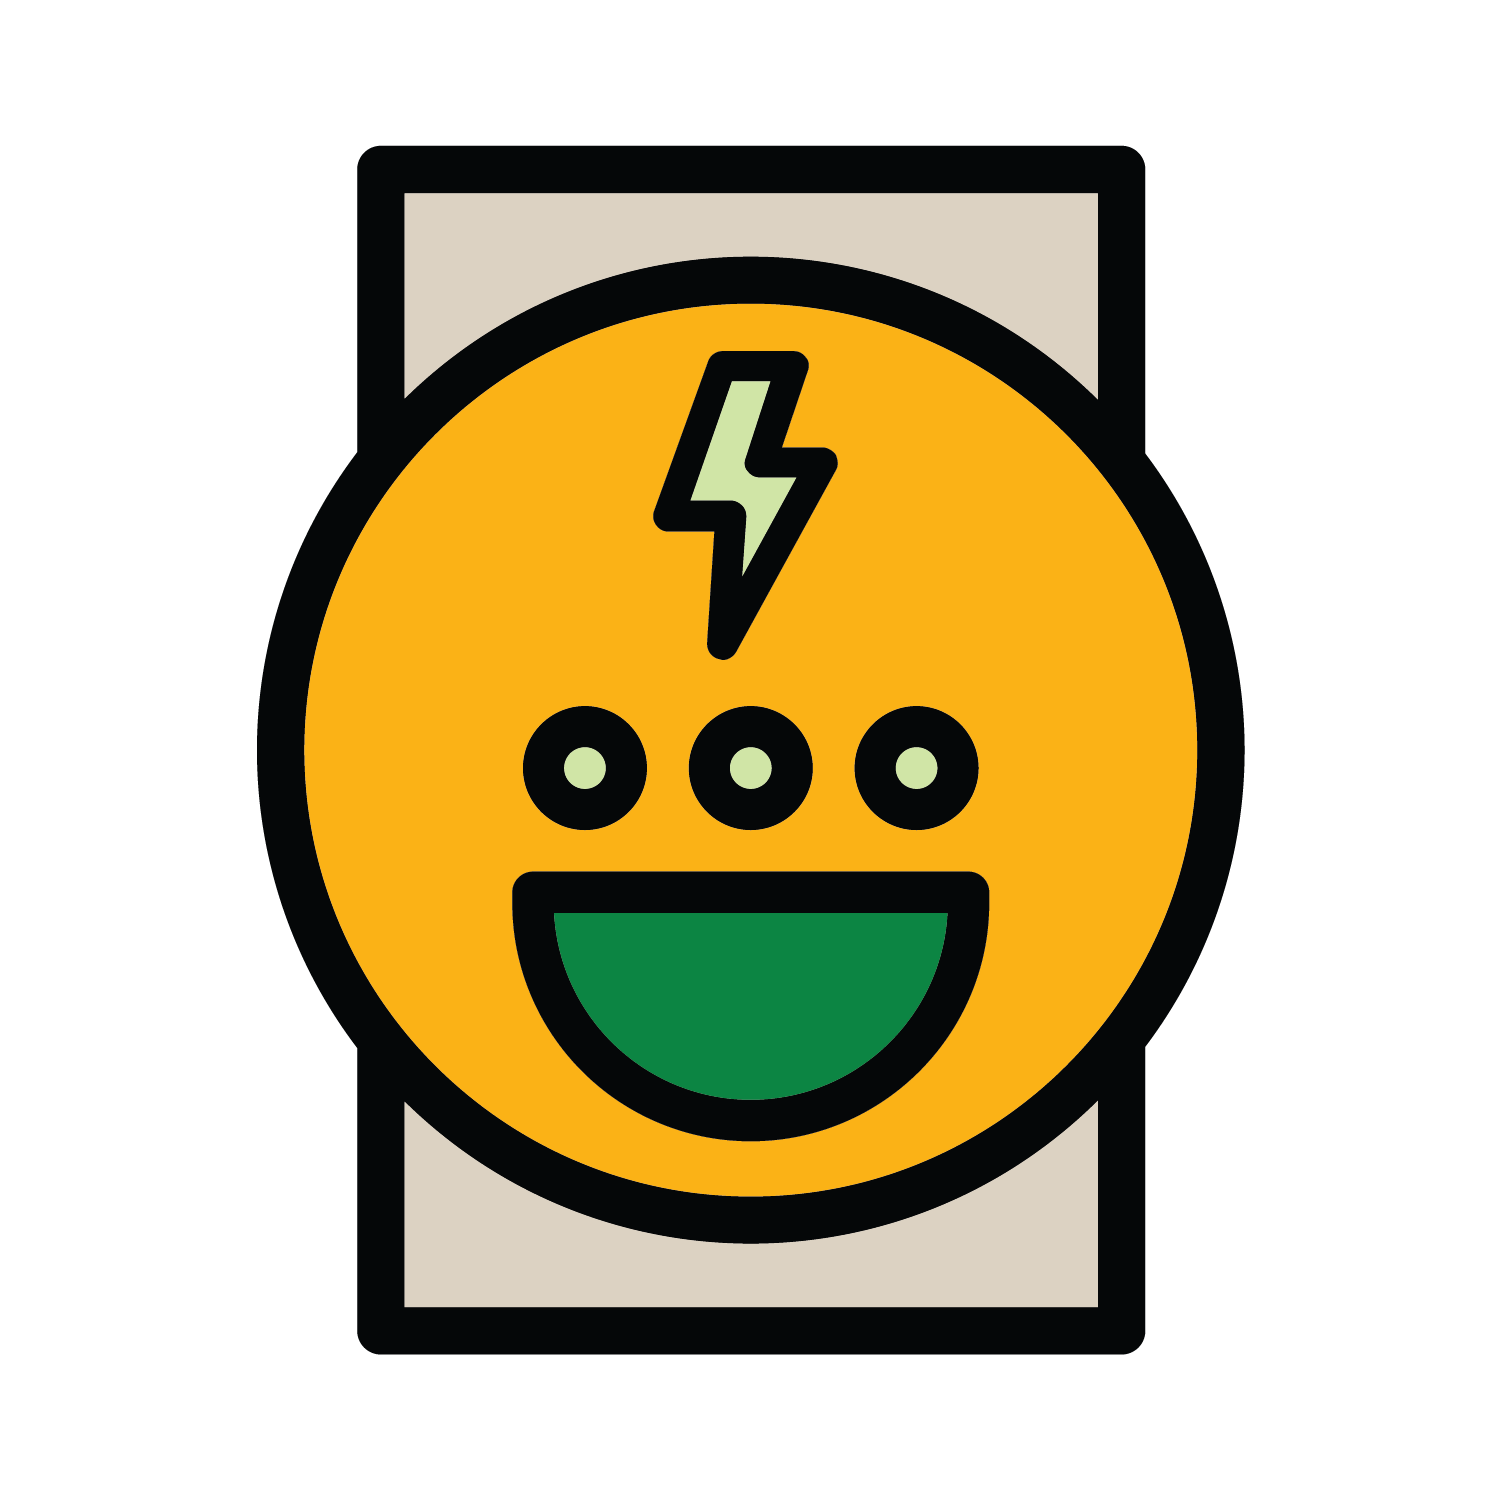 animated icon of utility meter